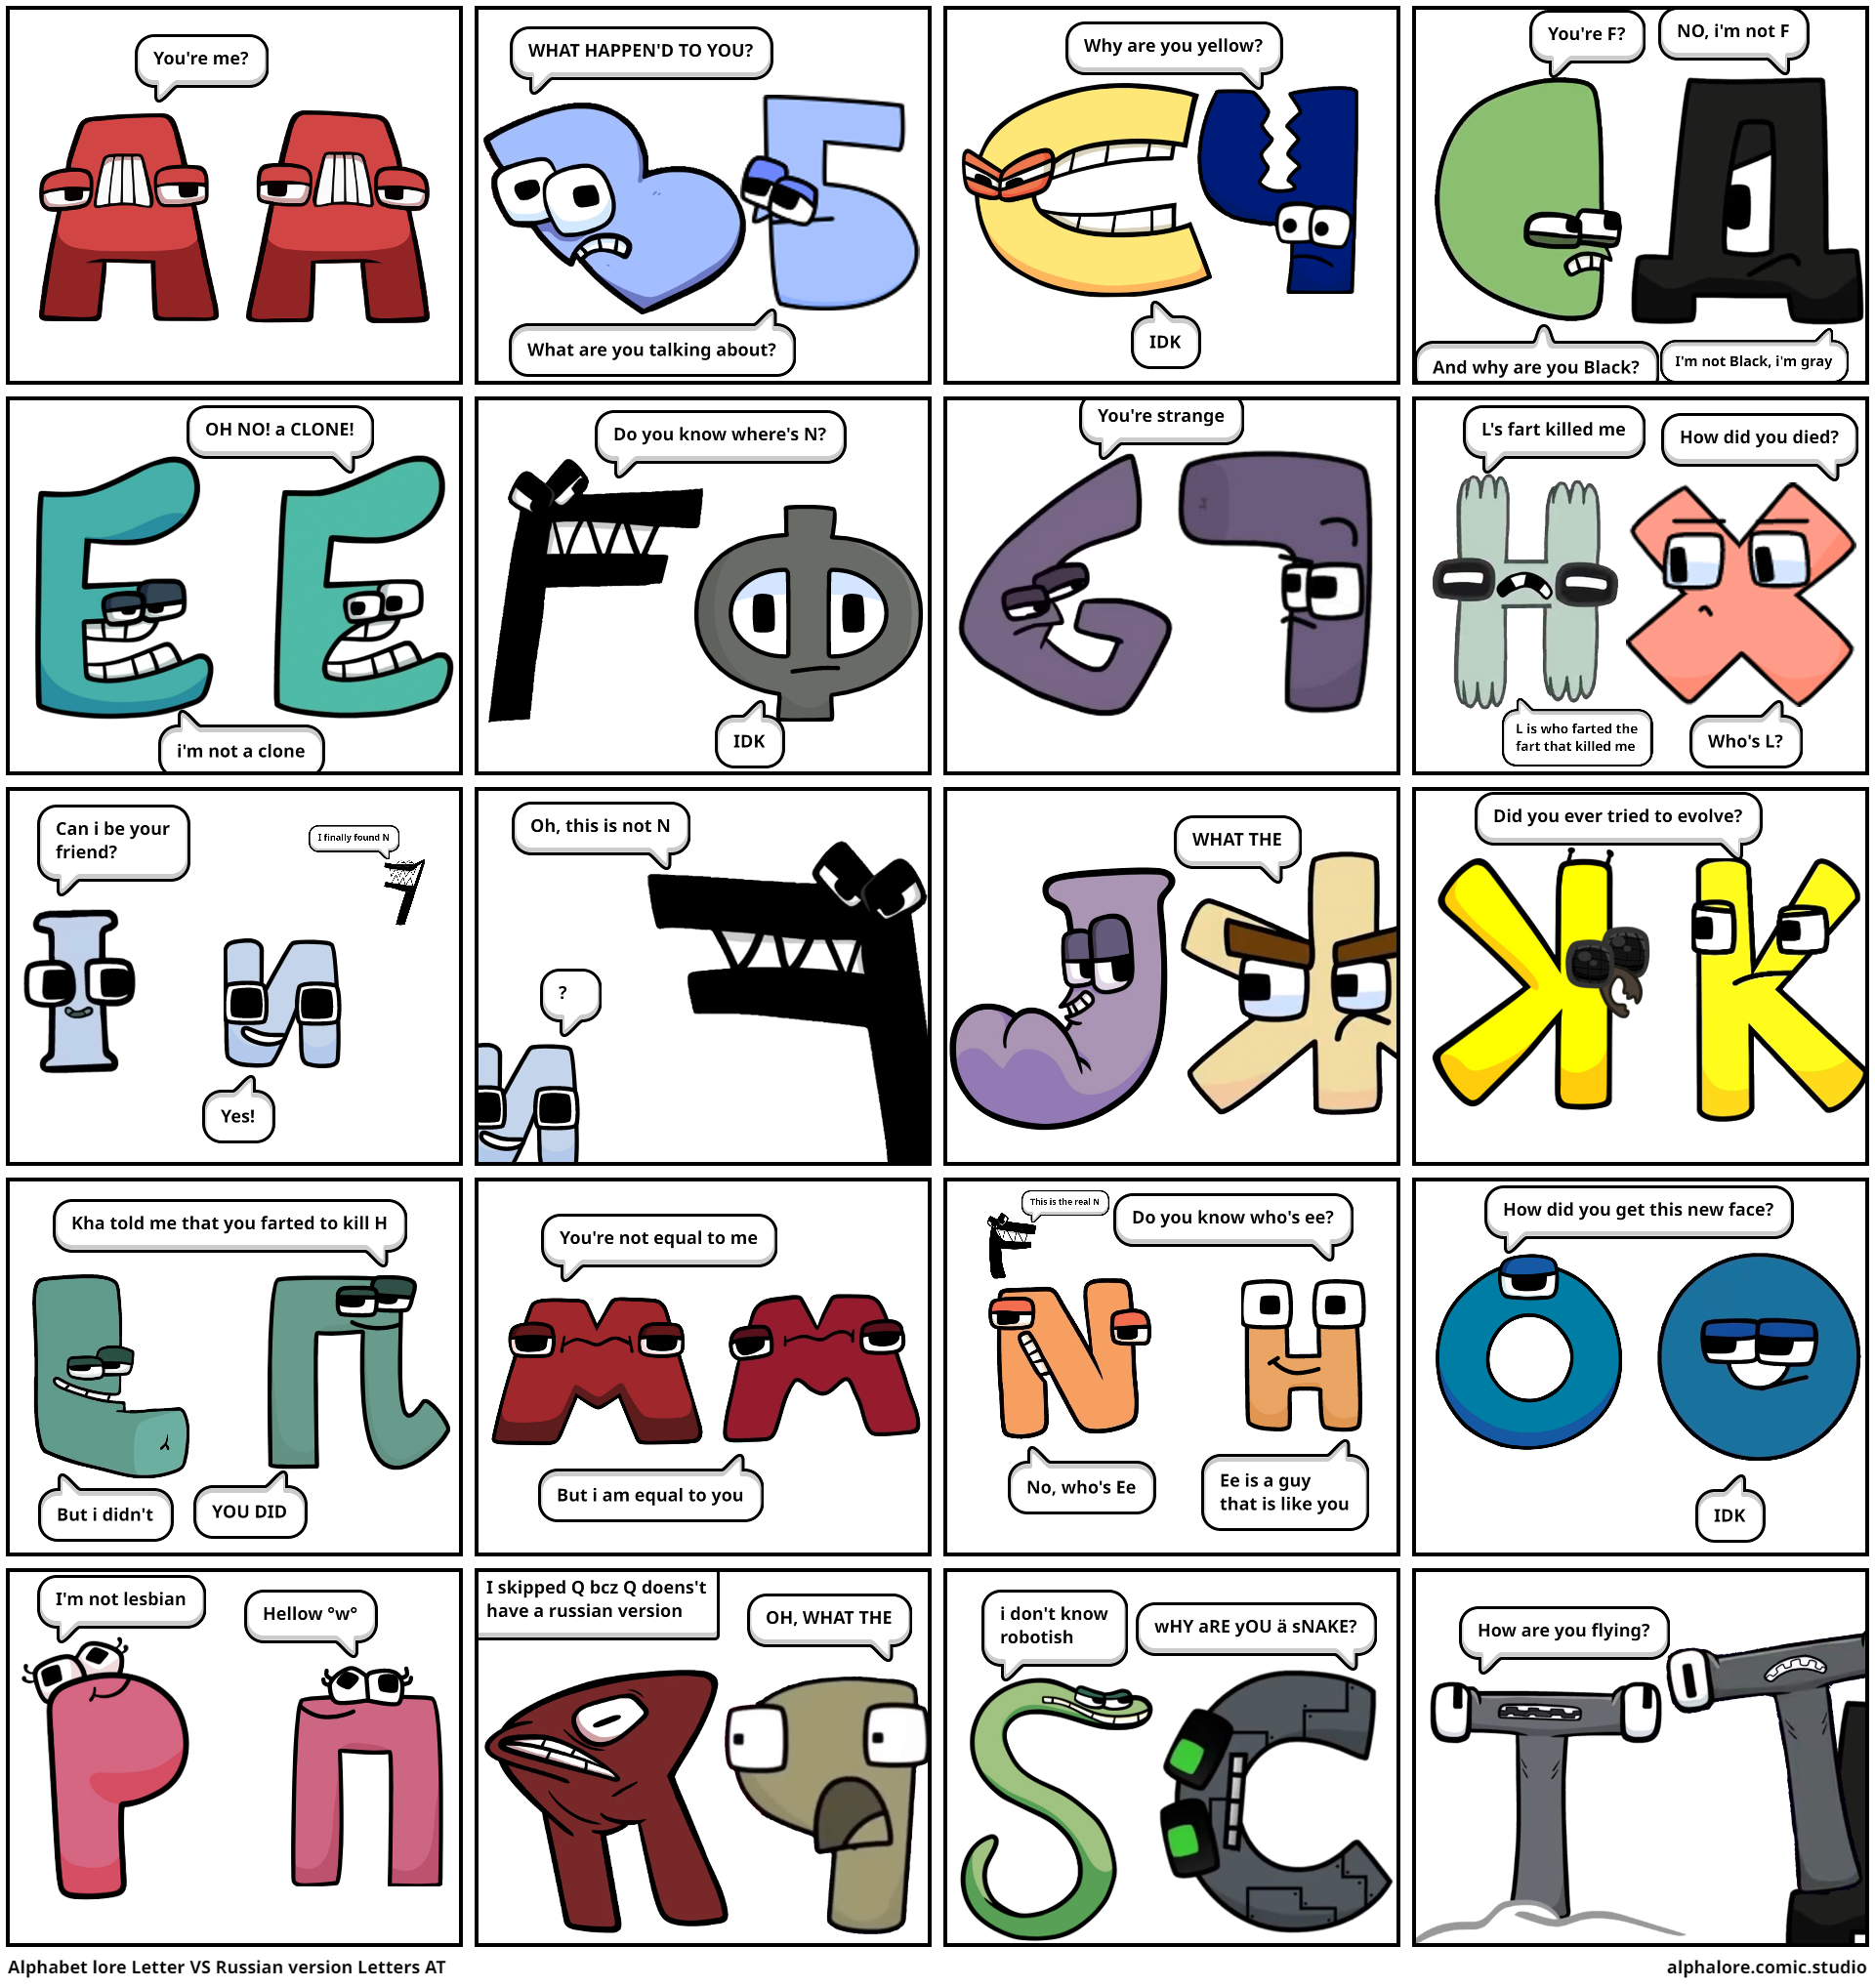 Which Alphabet Lore Letter are You